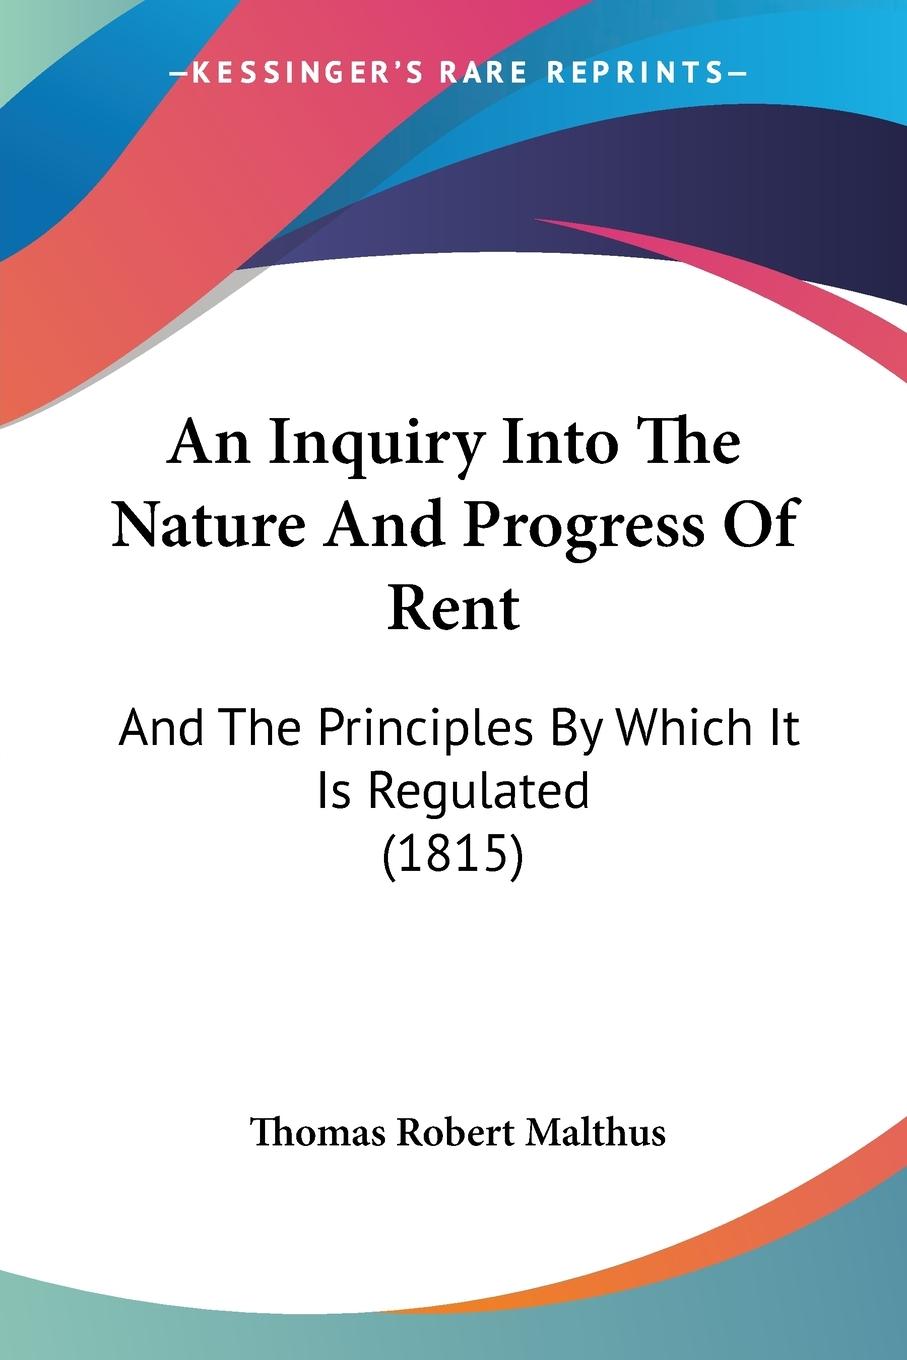 An Inquiry Into The Nature And Progress Of Rent - Malthus, Thomas Robert